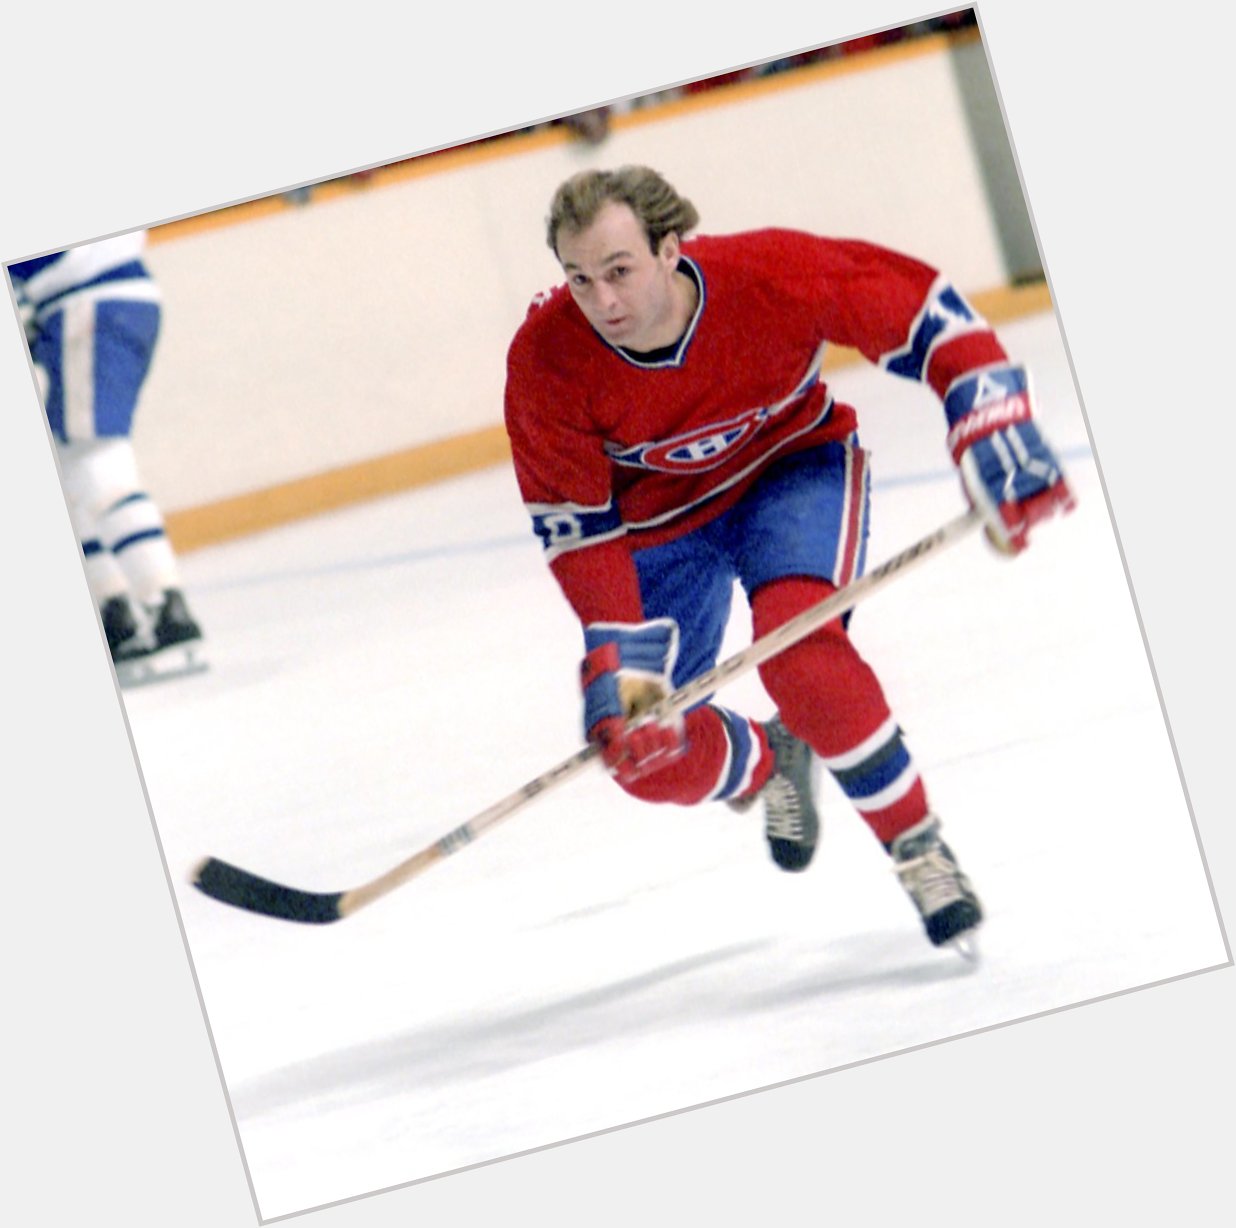 Happy bday to former Canadiens great Guy Lafleur, born in 1951 